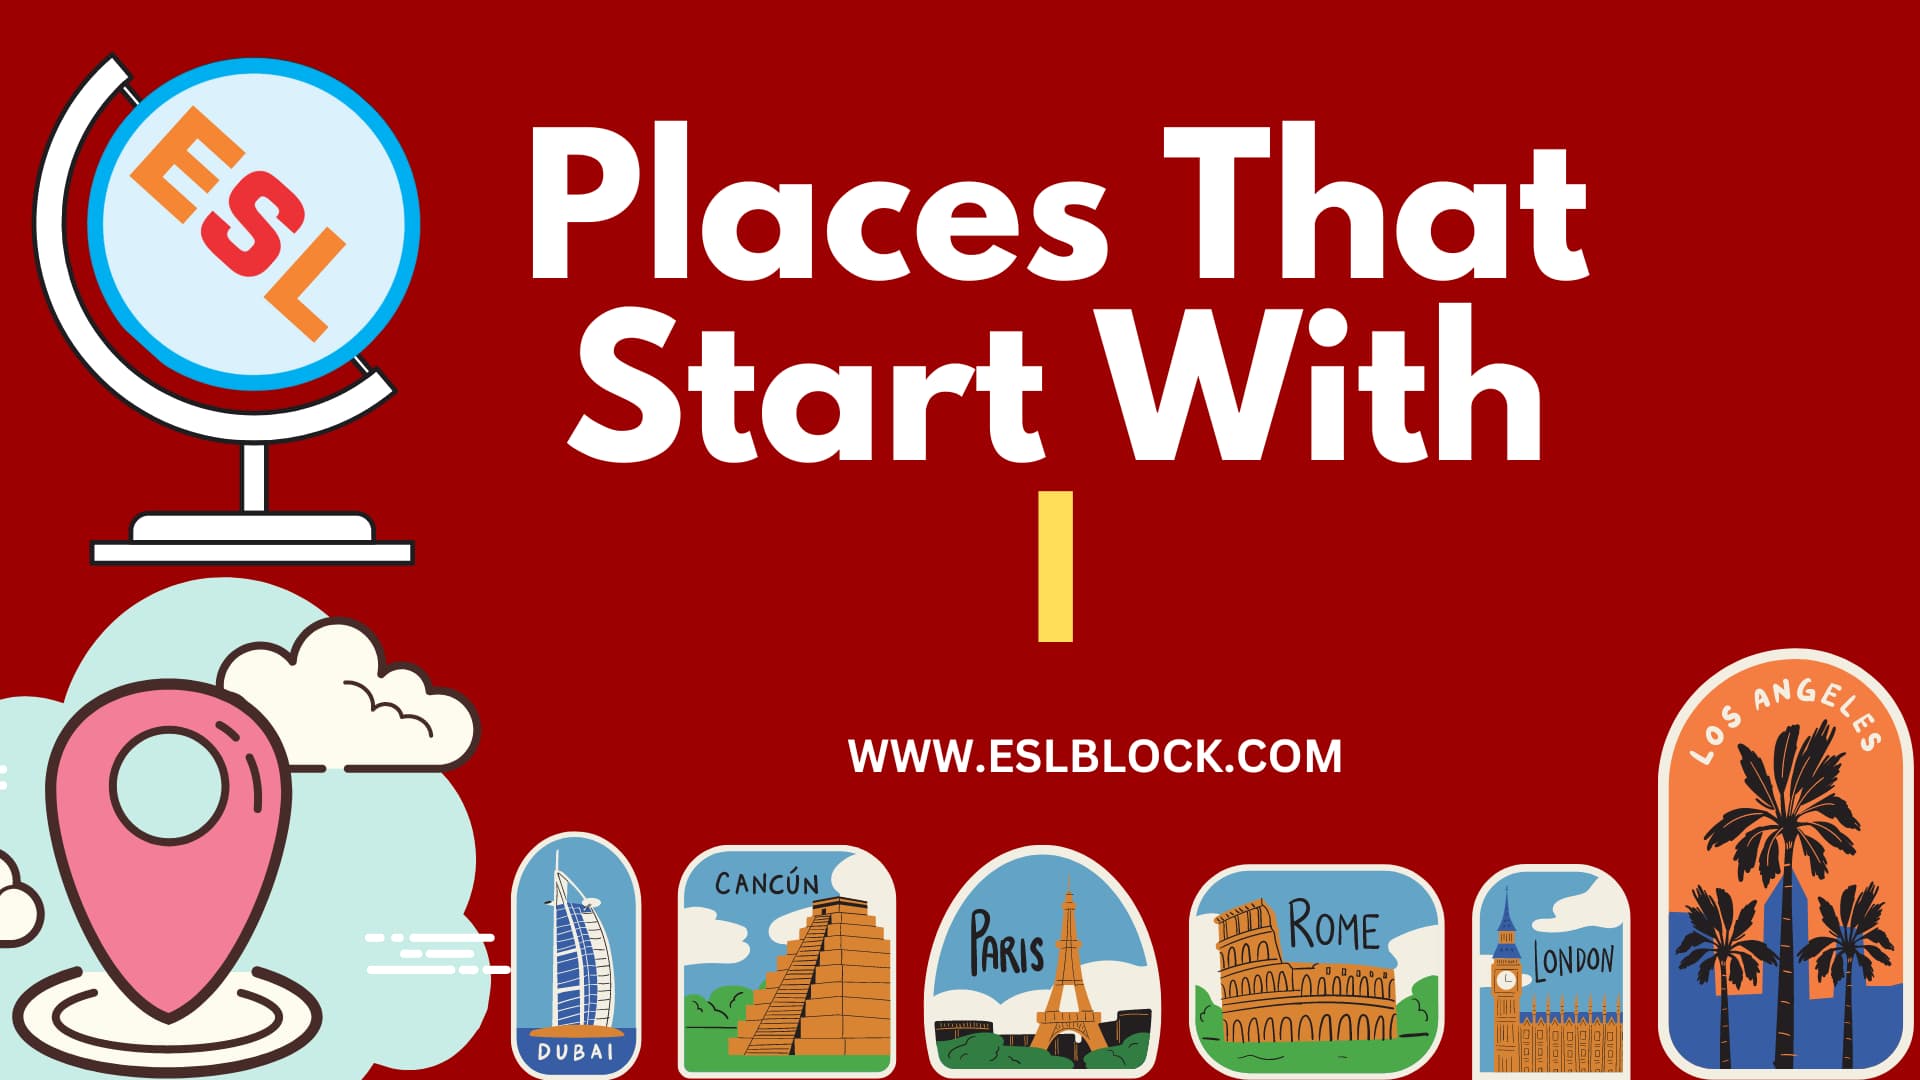 4 Letter Places, 5 Letter Places Starting With I, English, English Grammar, English Vocabulary, English Words, I Places, I Places in English, I Places Names, List of Places That Start With I, Places List, Places Names, Places That Start With I, Vocabulary, Words That Start With I